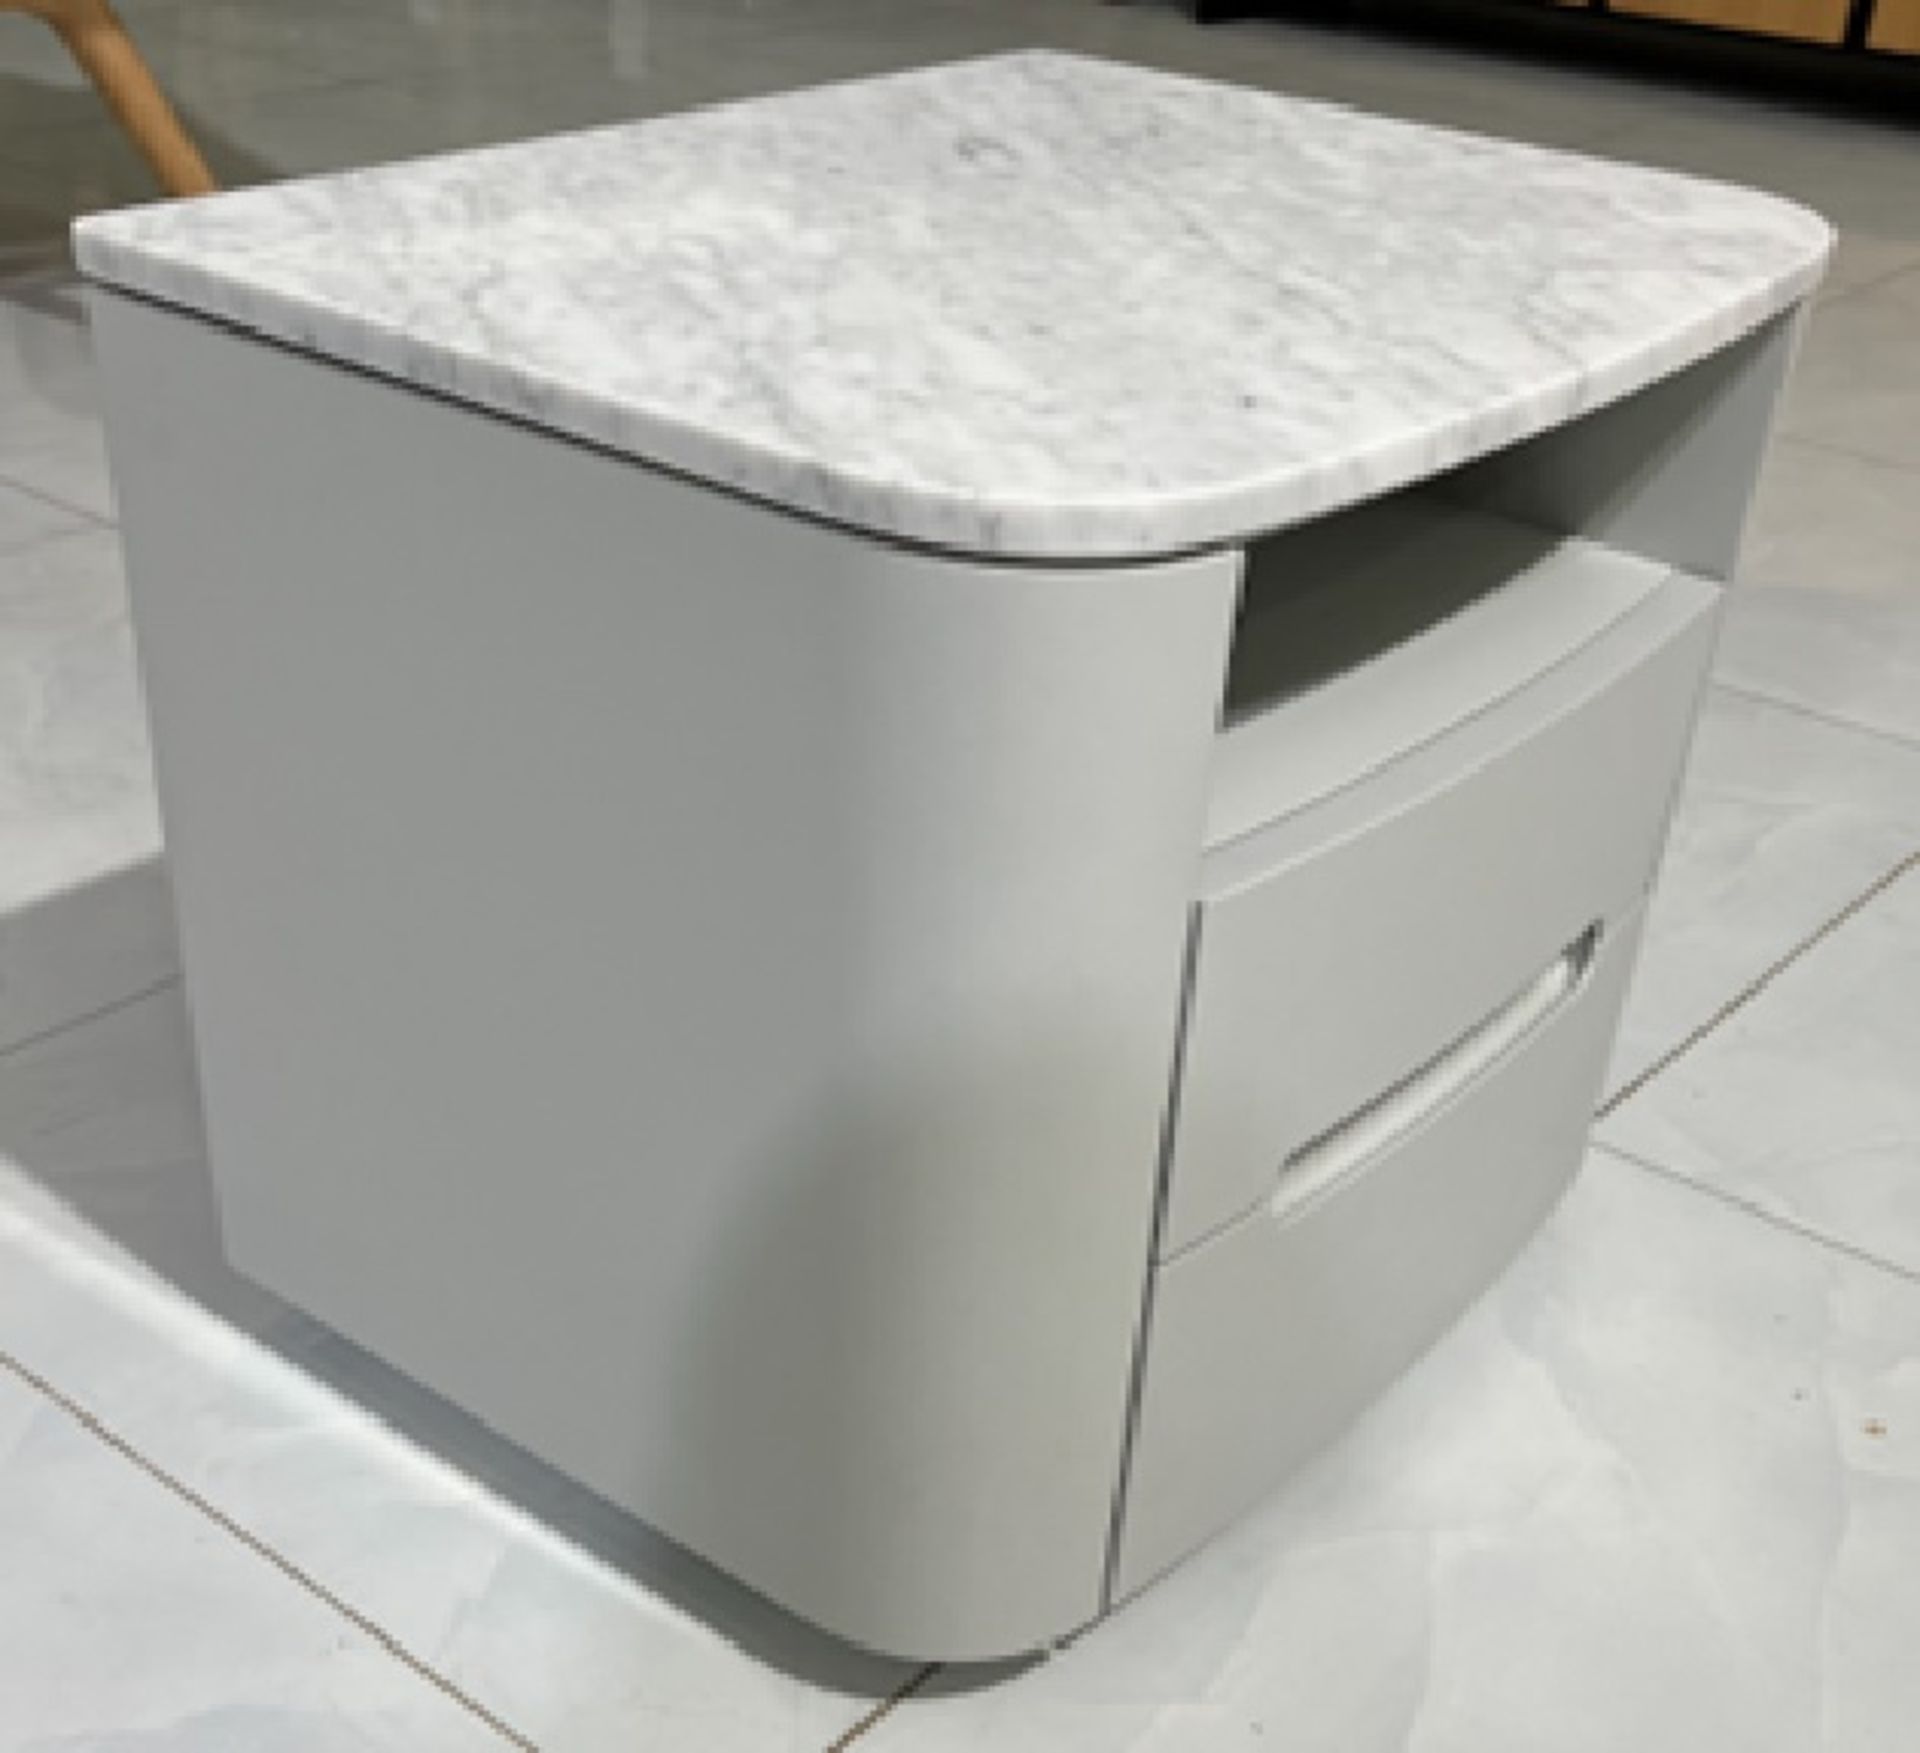 Florence Bedside Cabinet A stunning bedside cabinet with a top of Italian polished Carrara Marble, - Image 3 of 3